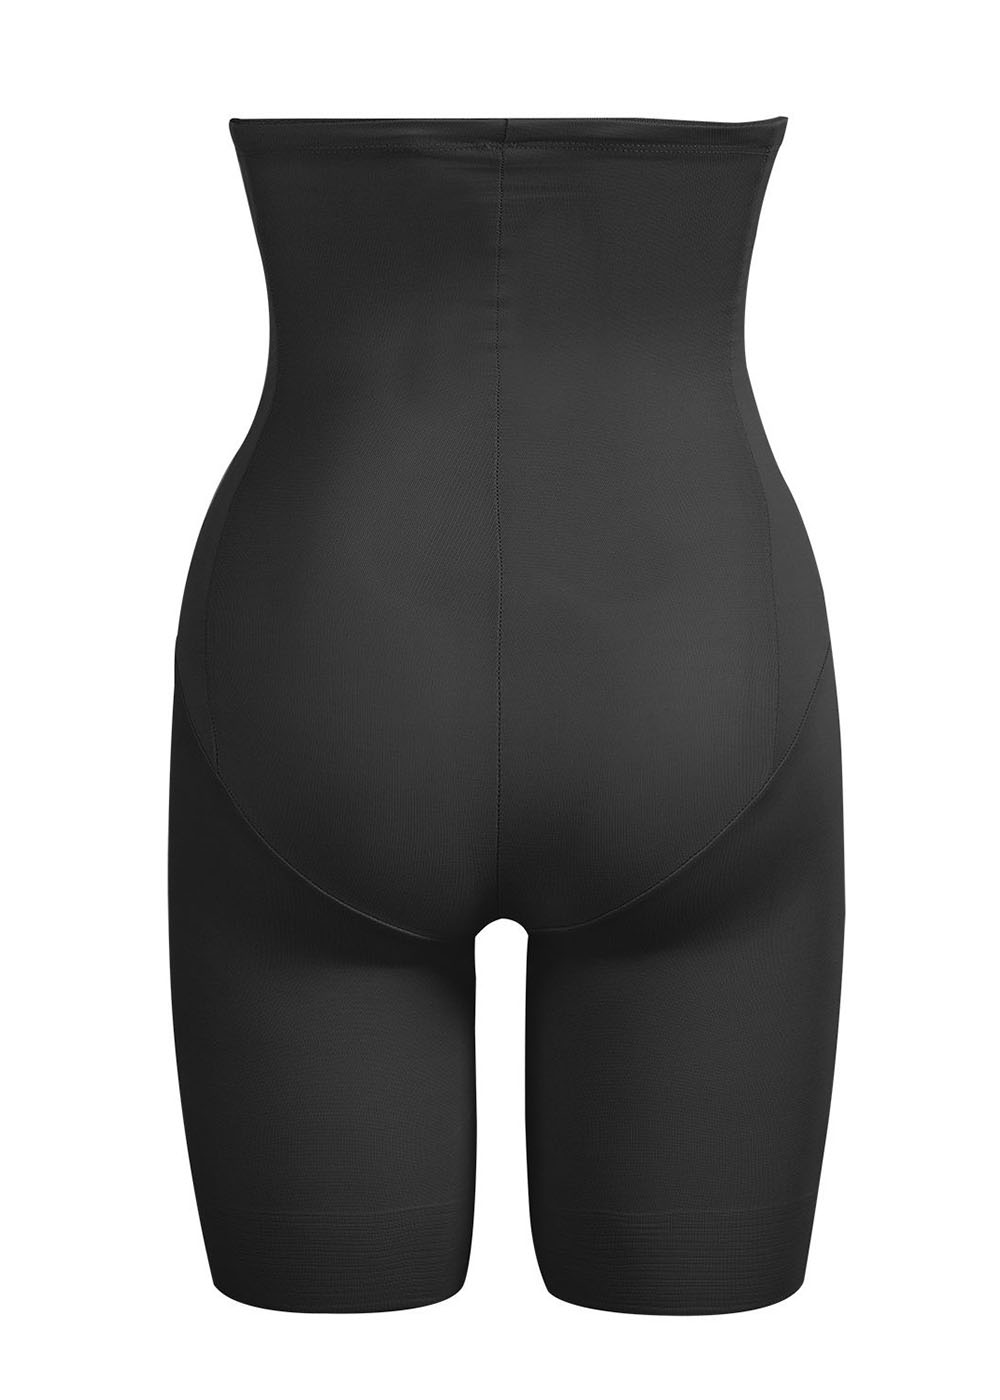 Panty Gainant Taille Extra Haute Miraclesuit Shapewear Noir